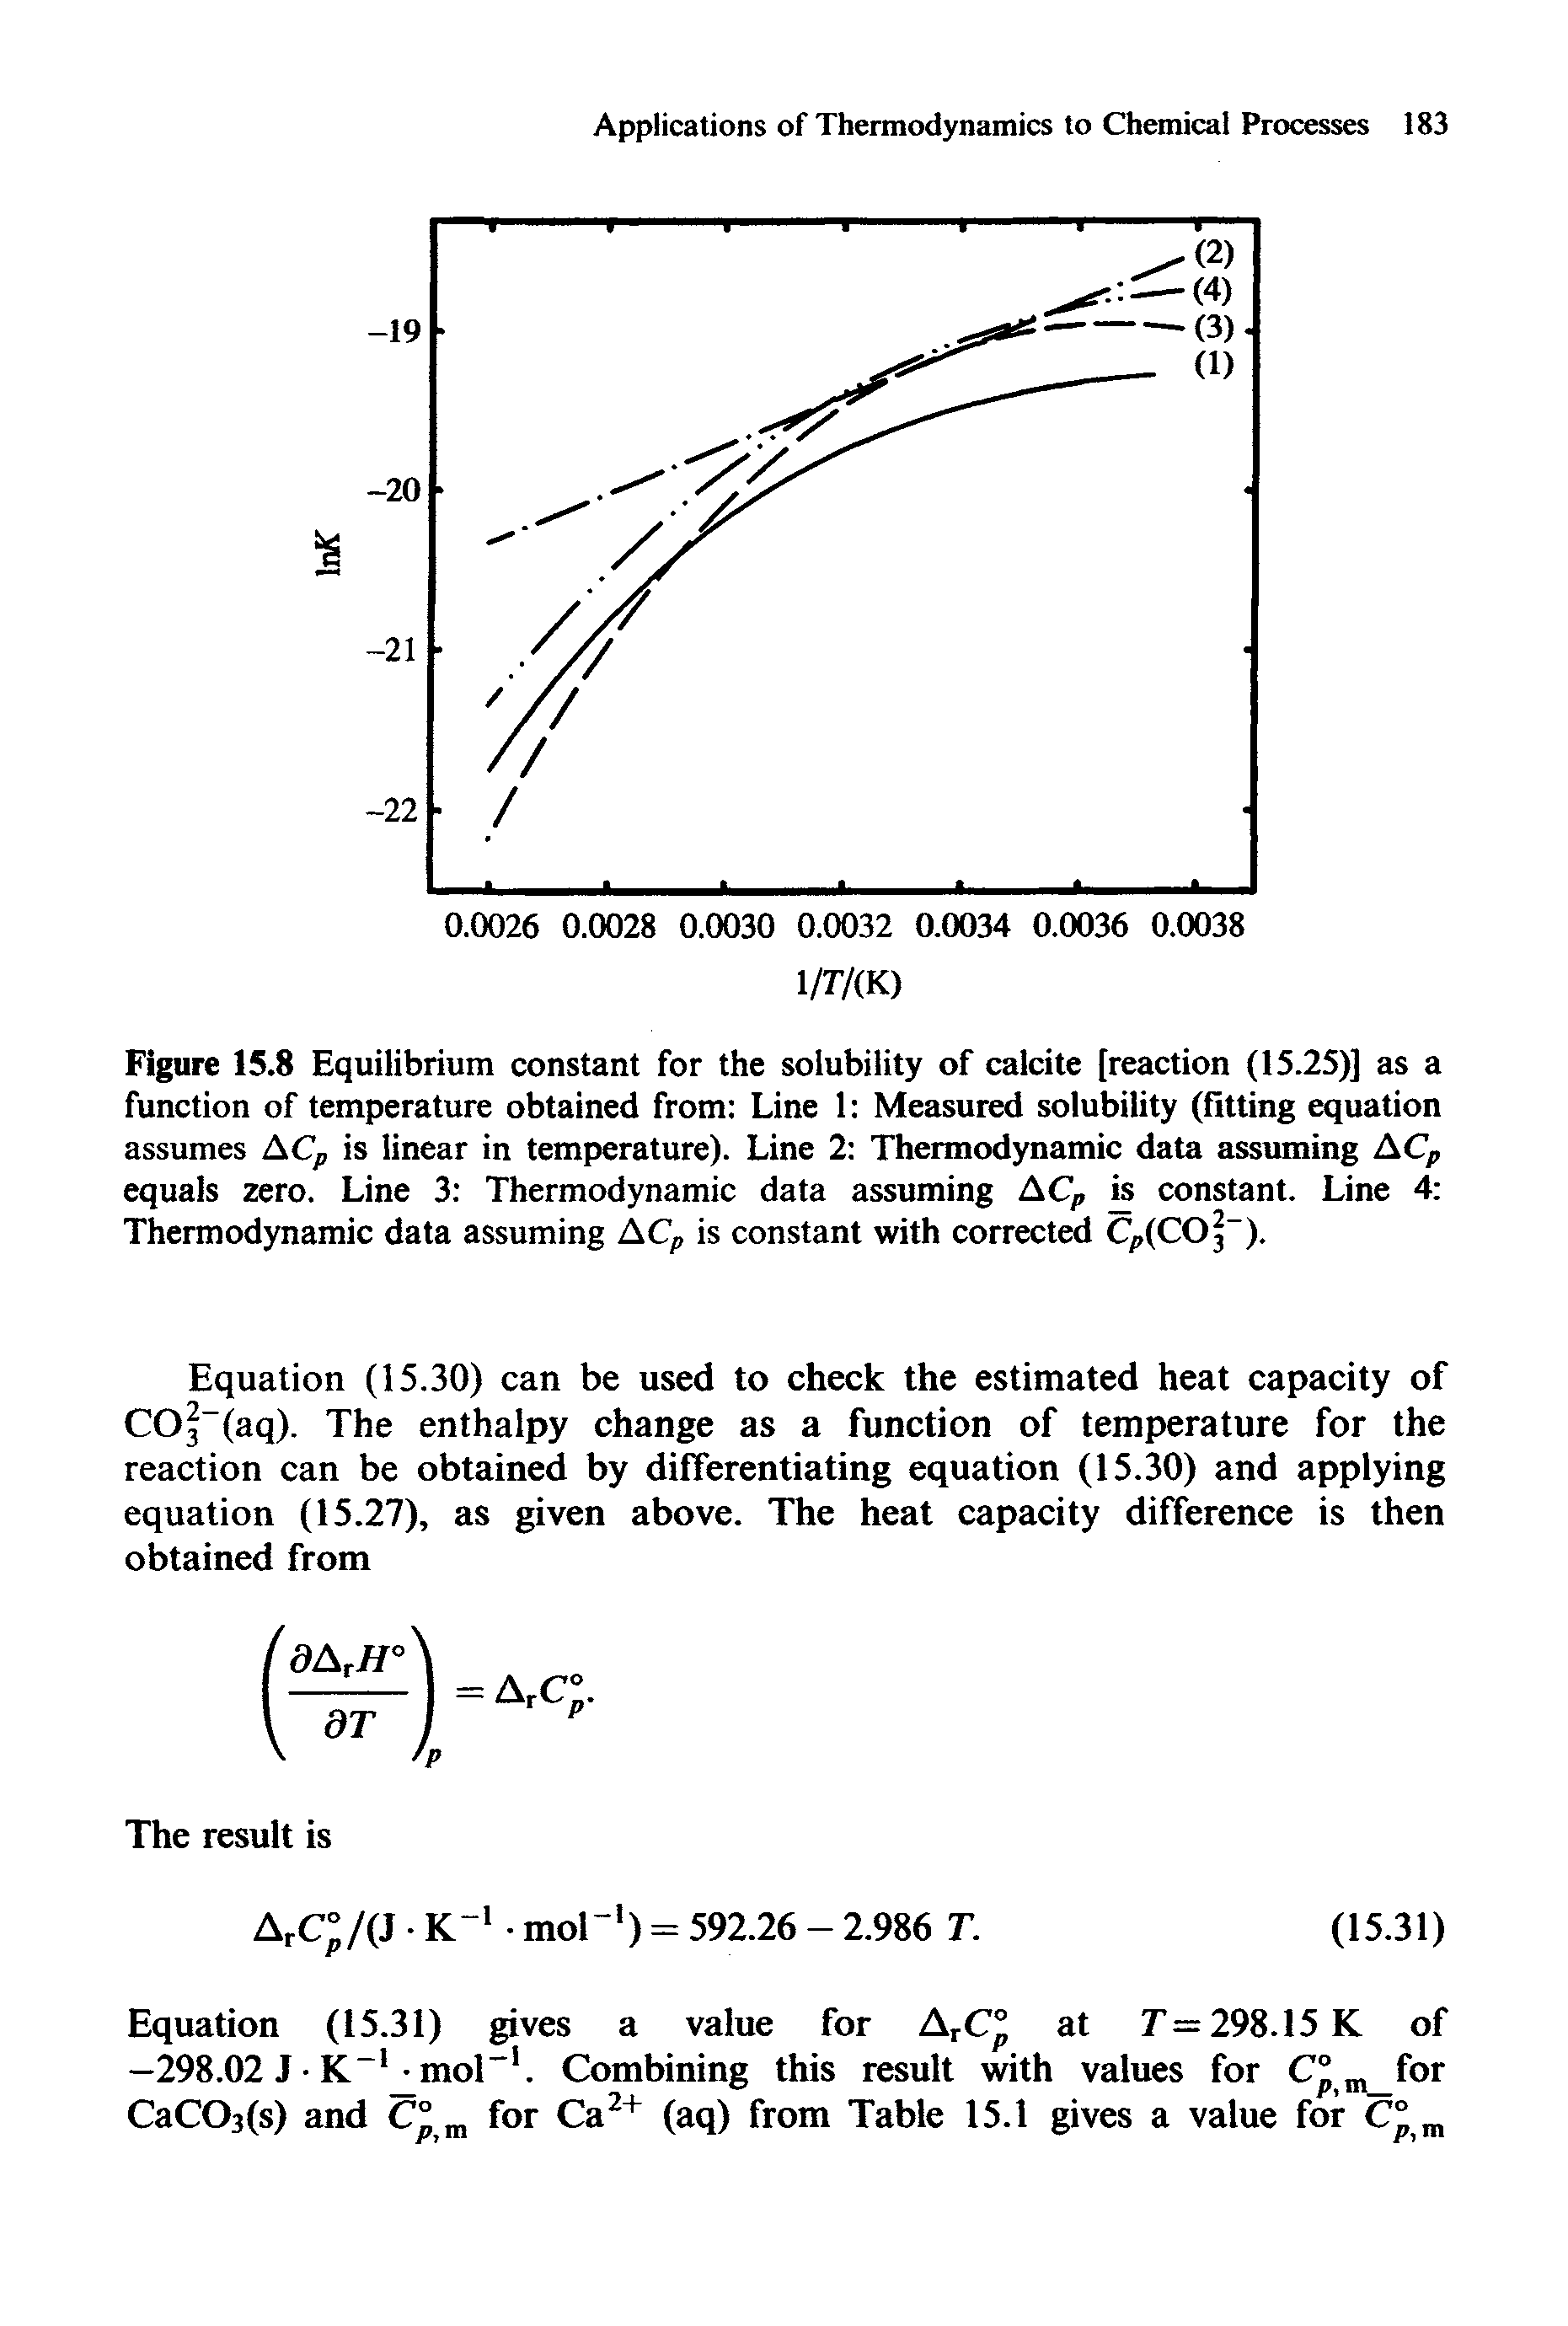 Figure 15.8 Equilibrium constant for the solubility of calcite [reaction (15.25)] as a function of temperature obtained from Line 1 Measured solubility (fitting equation assumes ACp is linear in temperature). Line 2 Thermodynamic data assuming ACp equals zero. Line 3 Thermodynamic data assuming ACp is constant. Line 4 Thermodynamic data assuming ACp is constant with corrected CP(CO2-).